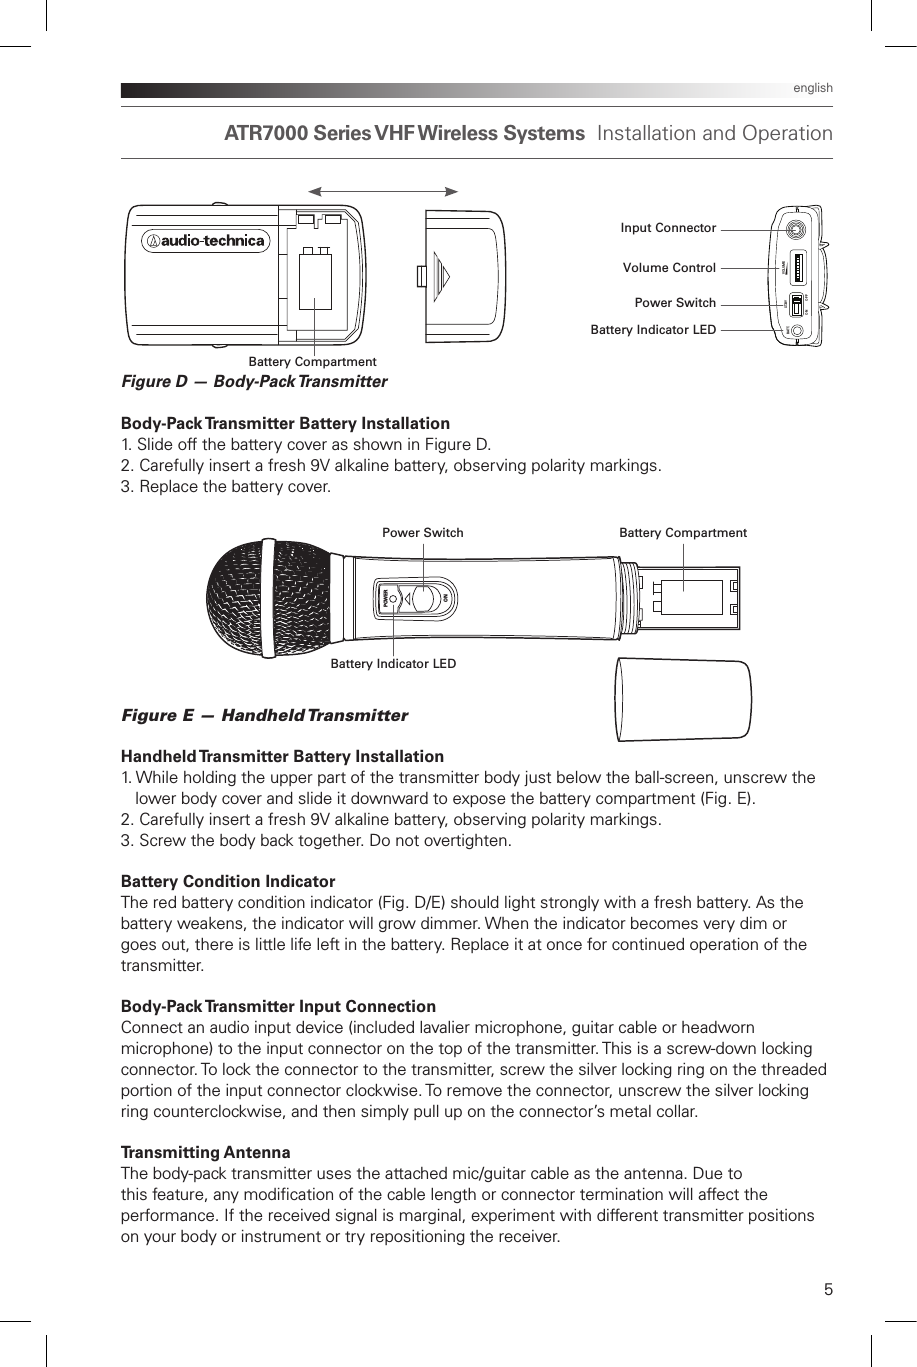 ATR7000  Series VHF Wireless  Systems  Installation and Operation 5englishFigure D — Body-Pack TransmitterBody-Pack Transmitter Battery Installation1. Slide off the battery cover as shown in Figure D.2. Carefully insert a fresh 9V alkaline battery, observing polarity markings.3. Replace the battery cover.Figure E — Handheld TransmitterHandheld Transmitter Battery Installation1. While holding the upper part of the transmitter body just below the ball-screen, unscrew the    lower body cover and slide it downward to expose the battery compartment (Fig. E).2. Carefully insert a fresh 9V alkaline battery, observing polarity markings.3. Screw the body back together. Do not overtighten.Battery Condition IndicatorThe red battery condition indicator (Fig. D/E) should light strongly with a fresh battery. As the battery weakens, the indicator will grow dimmer. When the indicator becomes very dim or goes out, there is little life left in the battery. Replace it at once for continued operation of the transmitter.Body-Pack Transmitter Input ConnectionConnect an audio input device (included lavalier microphone, guitar cable or headworn microphone) to the input connector on the top of the transmitter. This is a screw-down locking connector. To lock the connector to the transmitter, screw the silver locking ring on the threaded portion of the input connector clockwise. To remove the connector, unscrew the silver locking ring counterclockwise, and then simply pull up on the connector’s metal collar.Transmitting Antenna The body-pack transmitter uses the attached mic/guitar cable as the antenna. Due to this feature, any modication of the cable length or connector termination will affect the performance. If the received signal is marginal, experiment with different transmitter positions on your body or instrument or try repositioning the receiver. POWERONBattery CompartmentInput ConnectorVolume ControlPower SwitchBattery Indicator LEDBattery Indicator LEDBattery CompartmentPower SwitchVOLUMEON OFFST. B YBA T T.